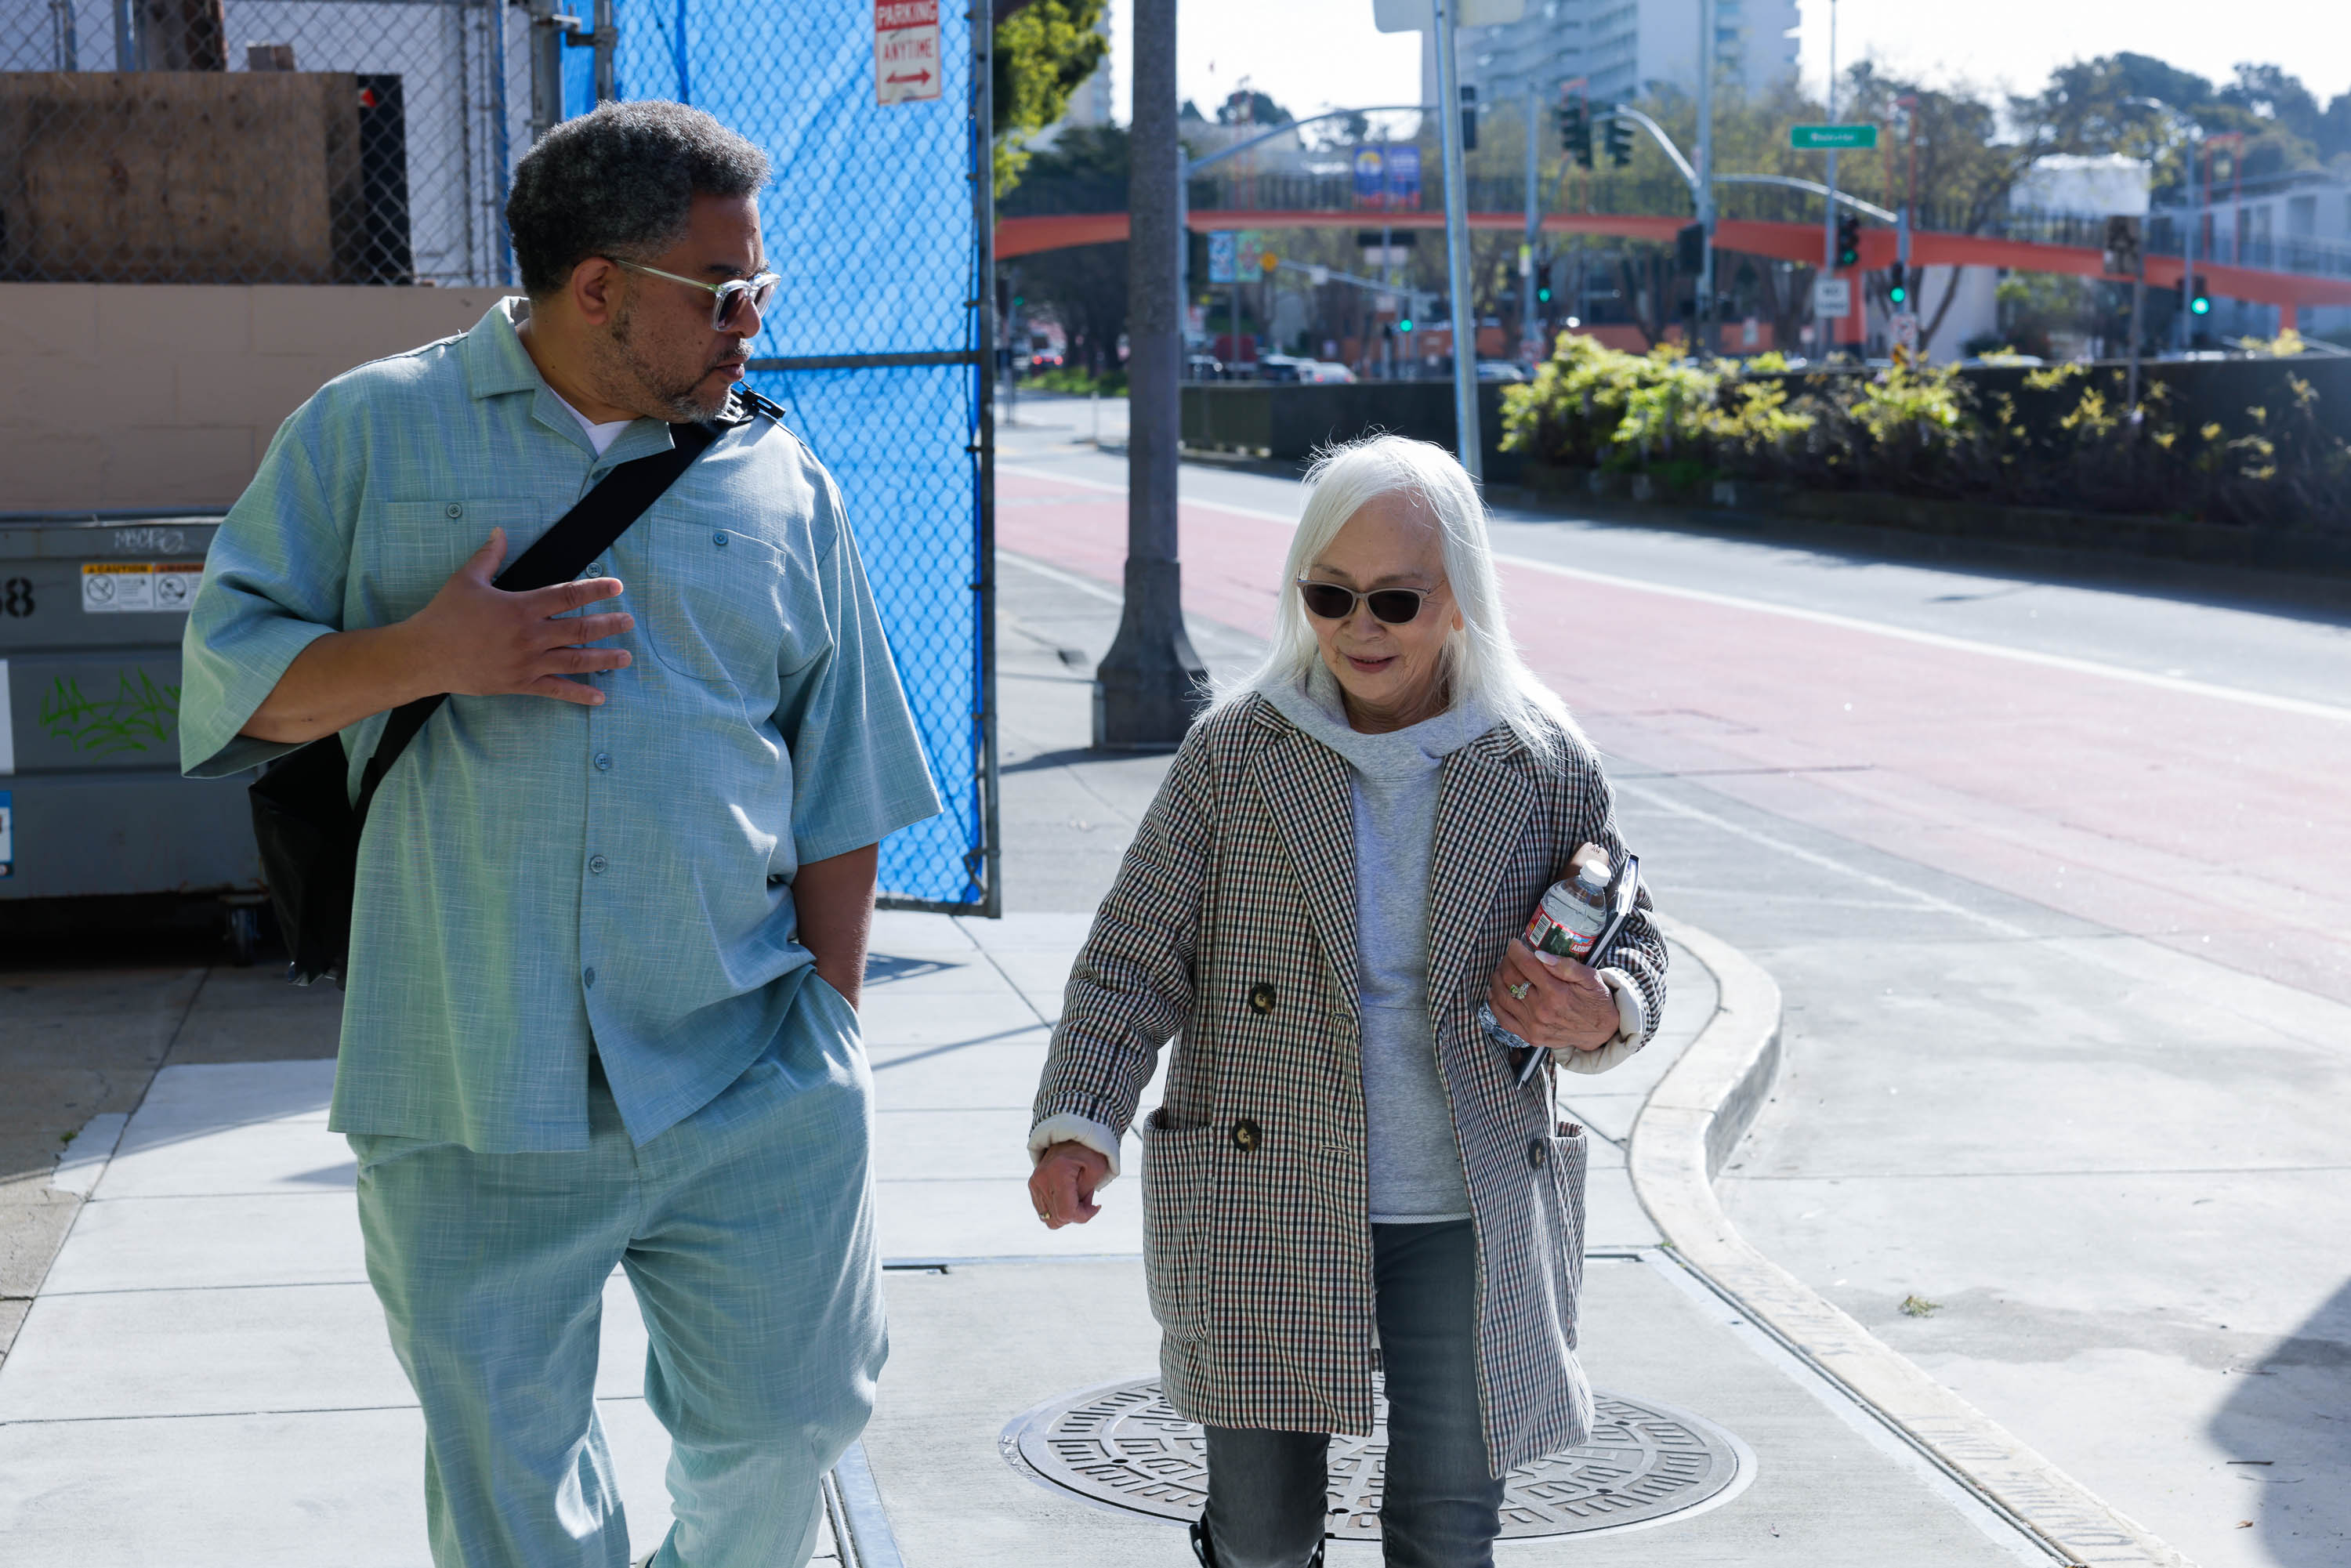 A man and a woman walk on a sunny sidewalk; the man glances aside, the woman carries a bottle.